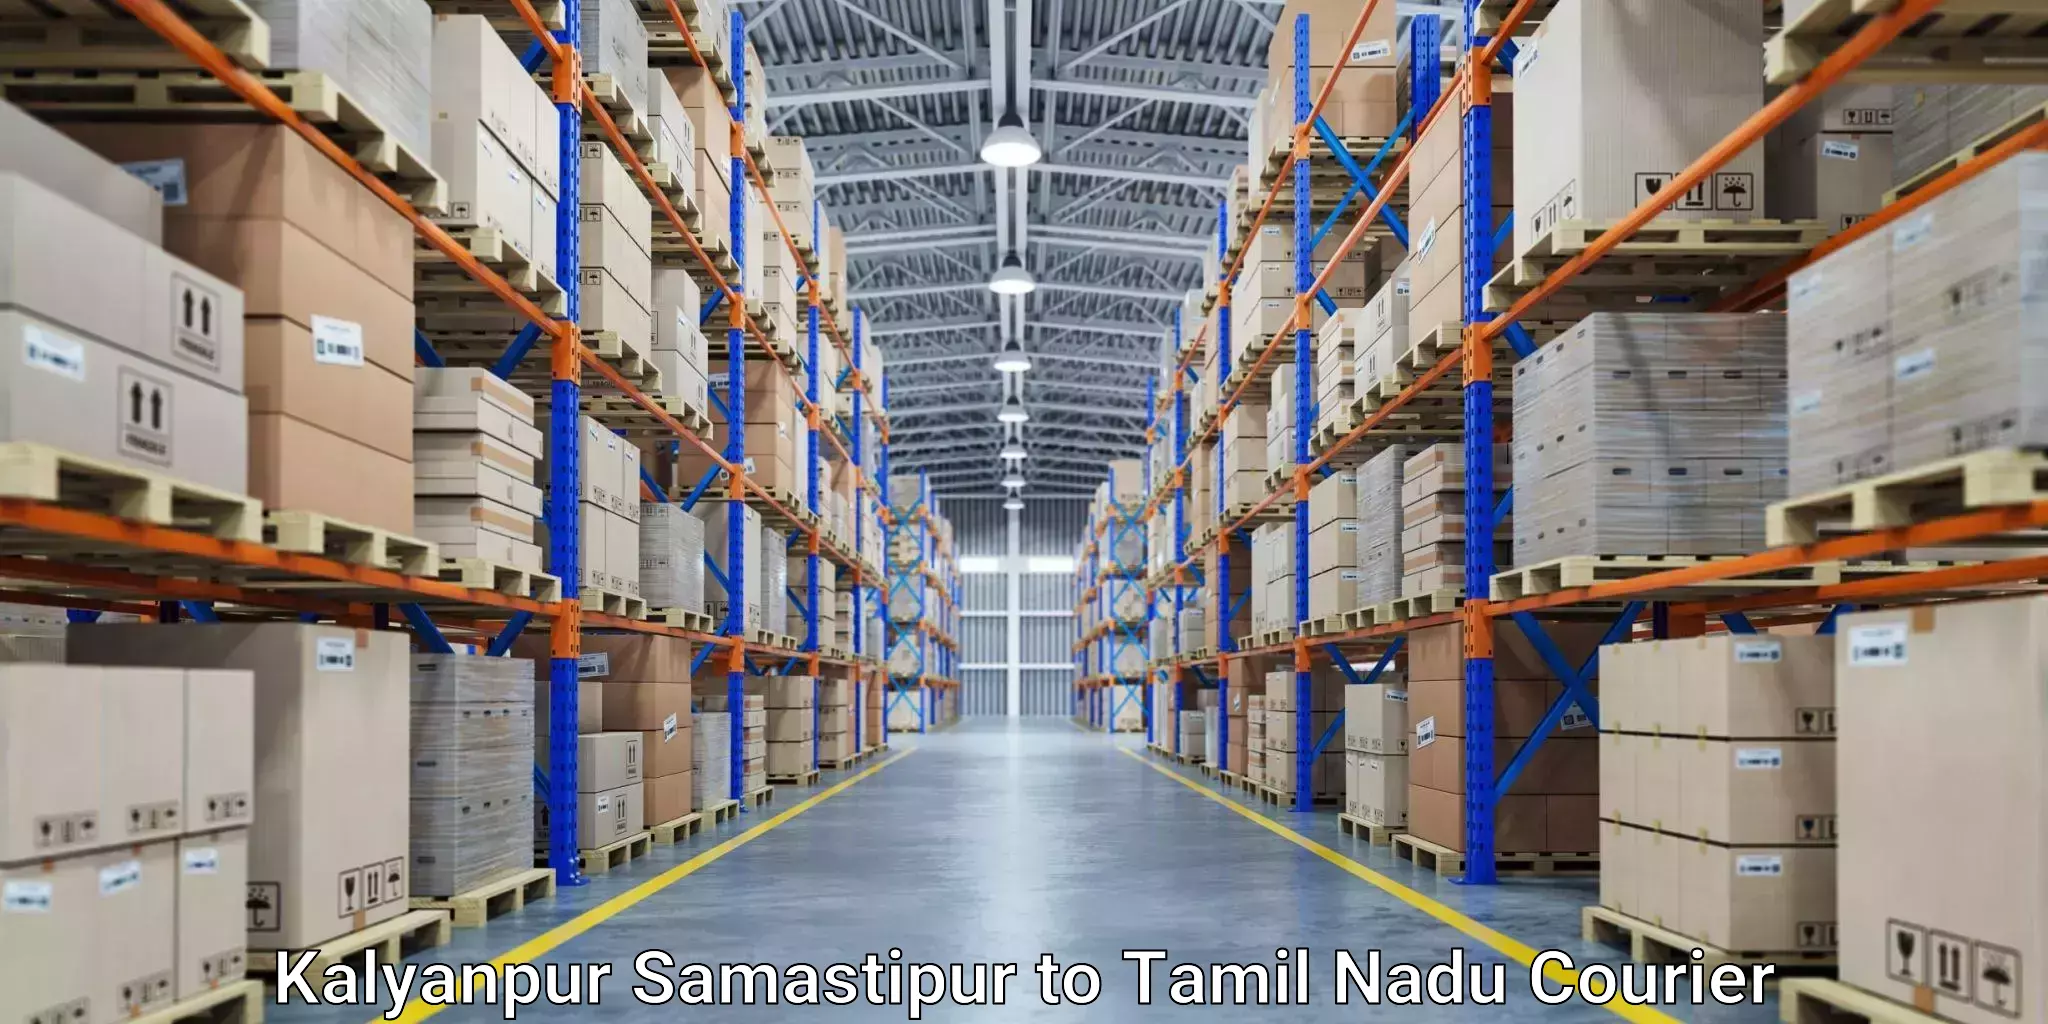 Reliable delivery network Kalyanpur Samastipur to Tirunelveli